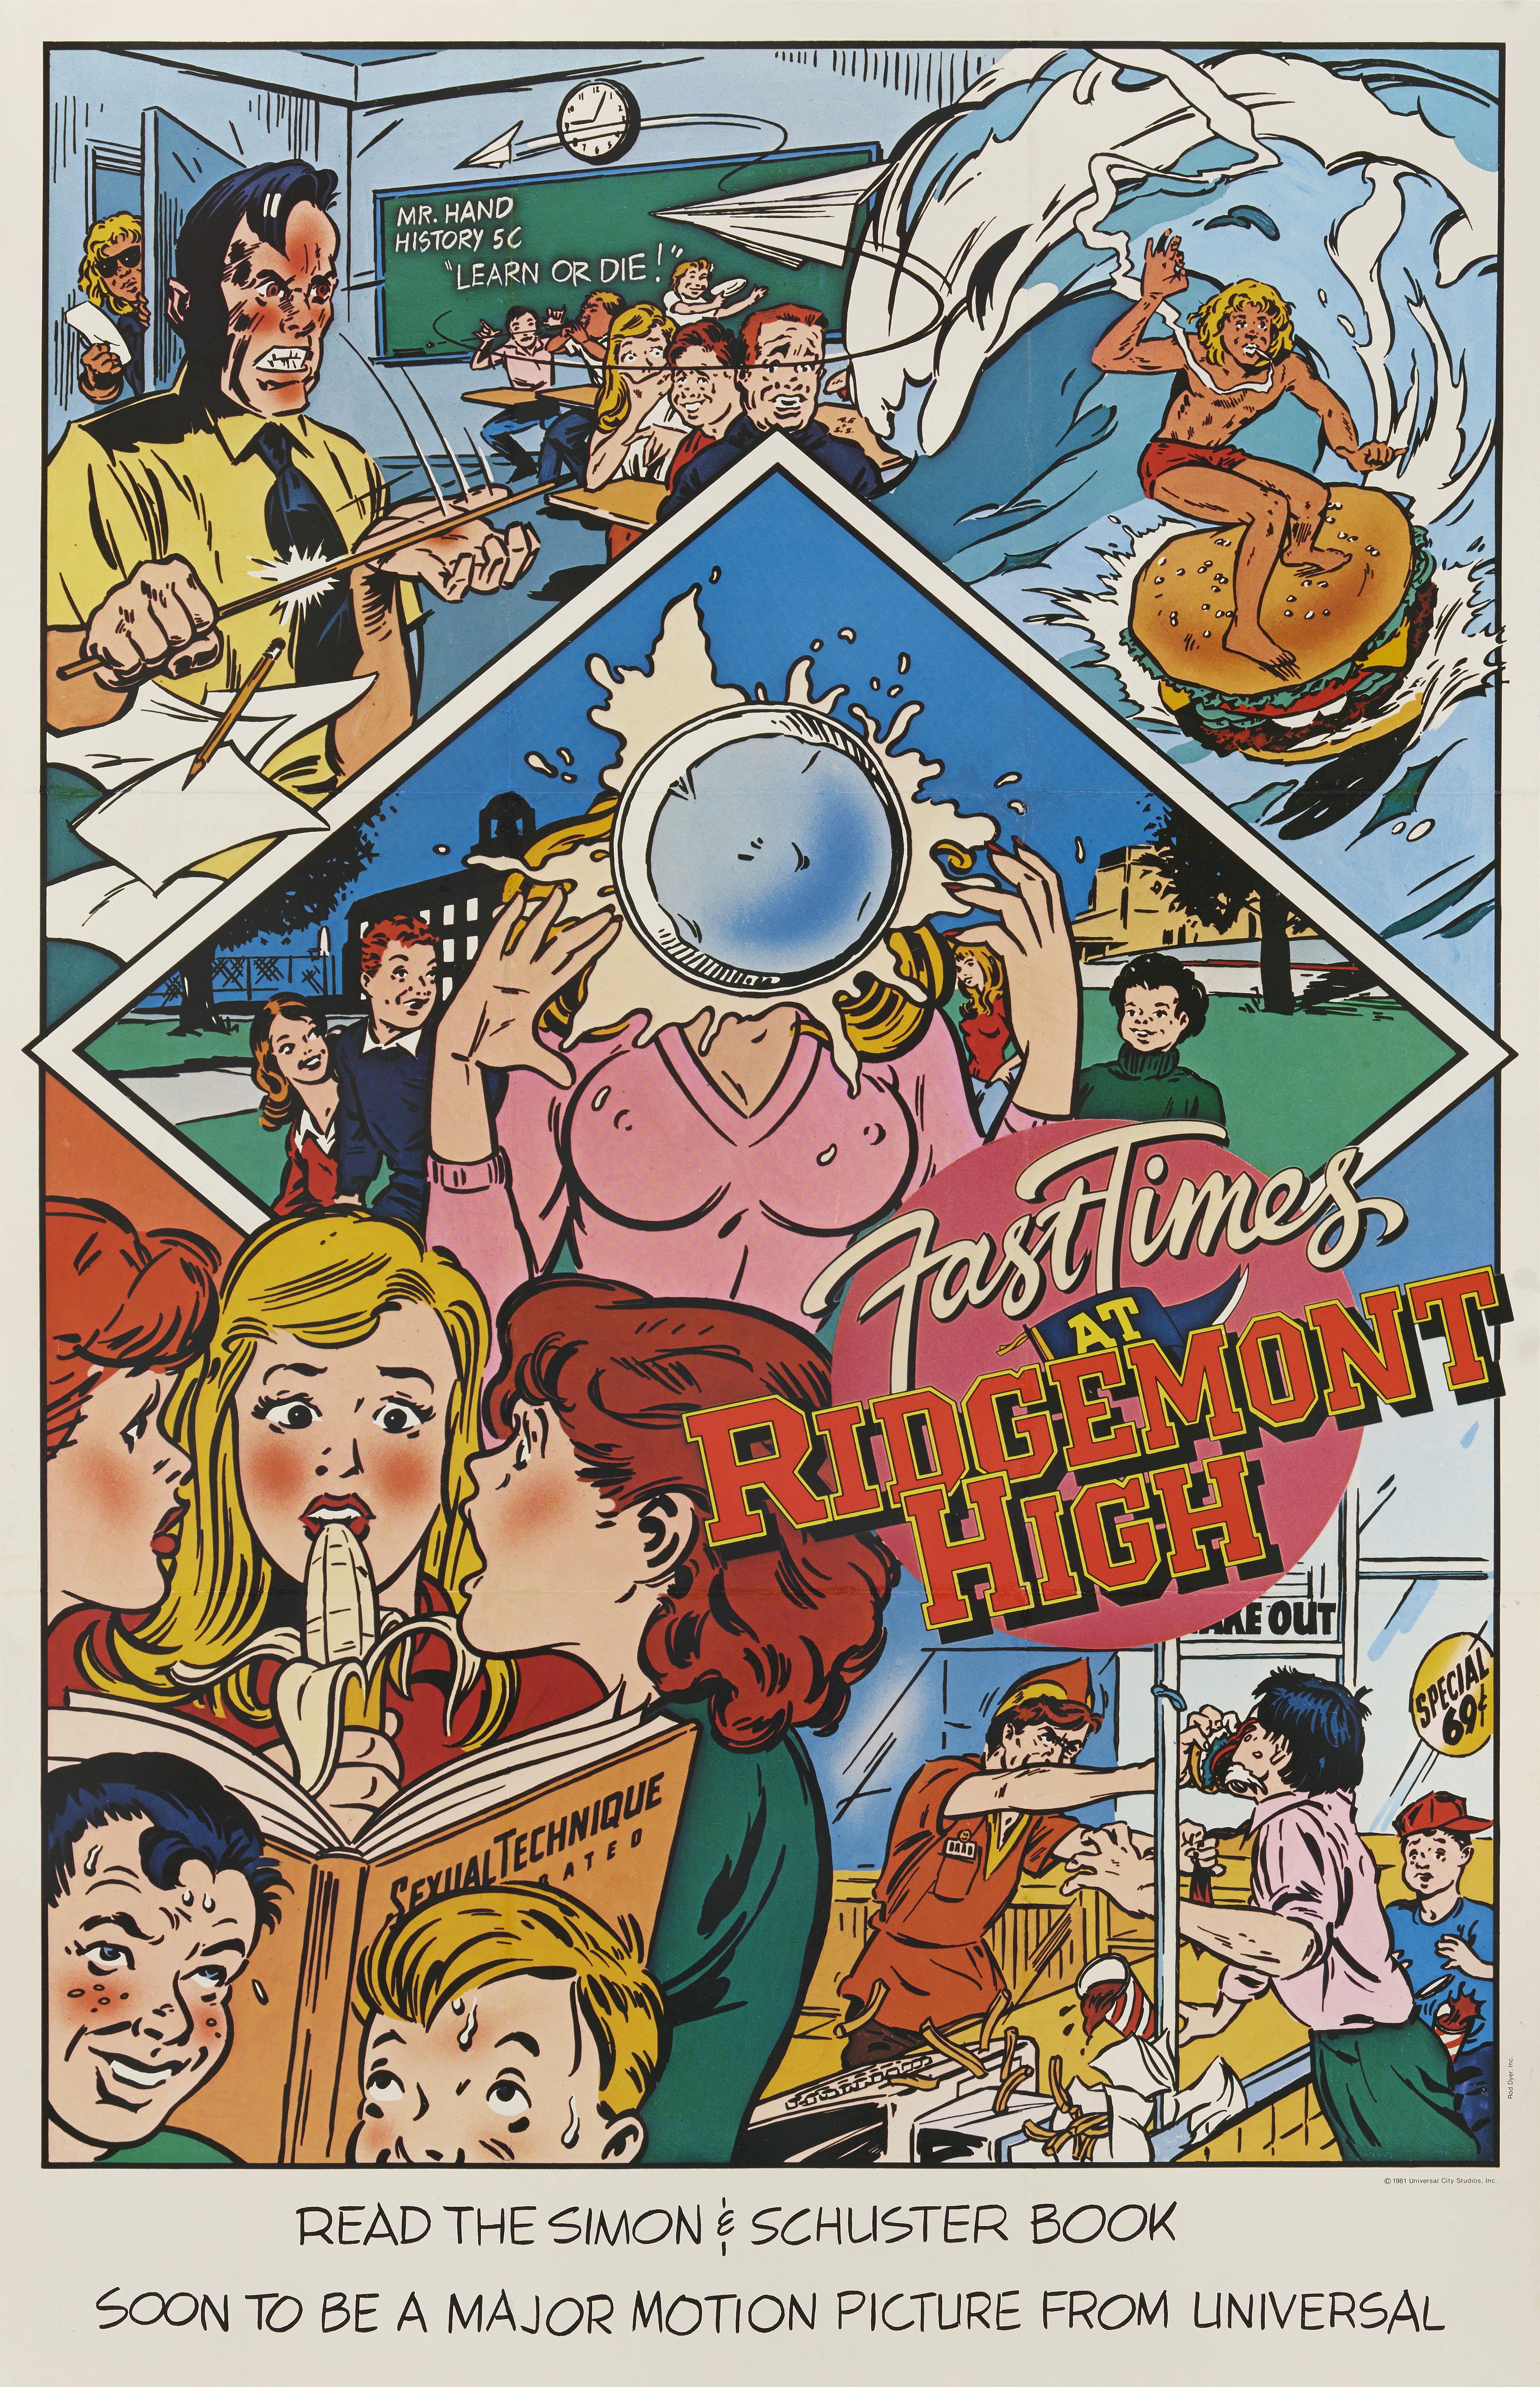 Original US Special book promotional poster for Fast Times at Ridgemont High, 1982.
This poster was to promote the publication of the book, and at the same time tell the public of the forthcoming film.
This is an American coming-of-age comedy